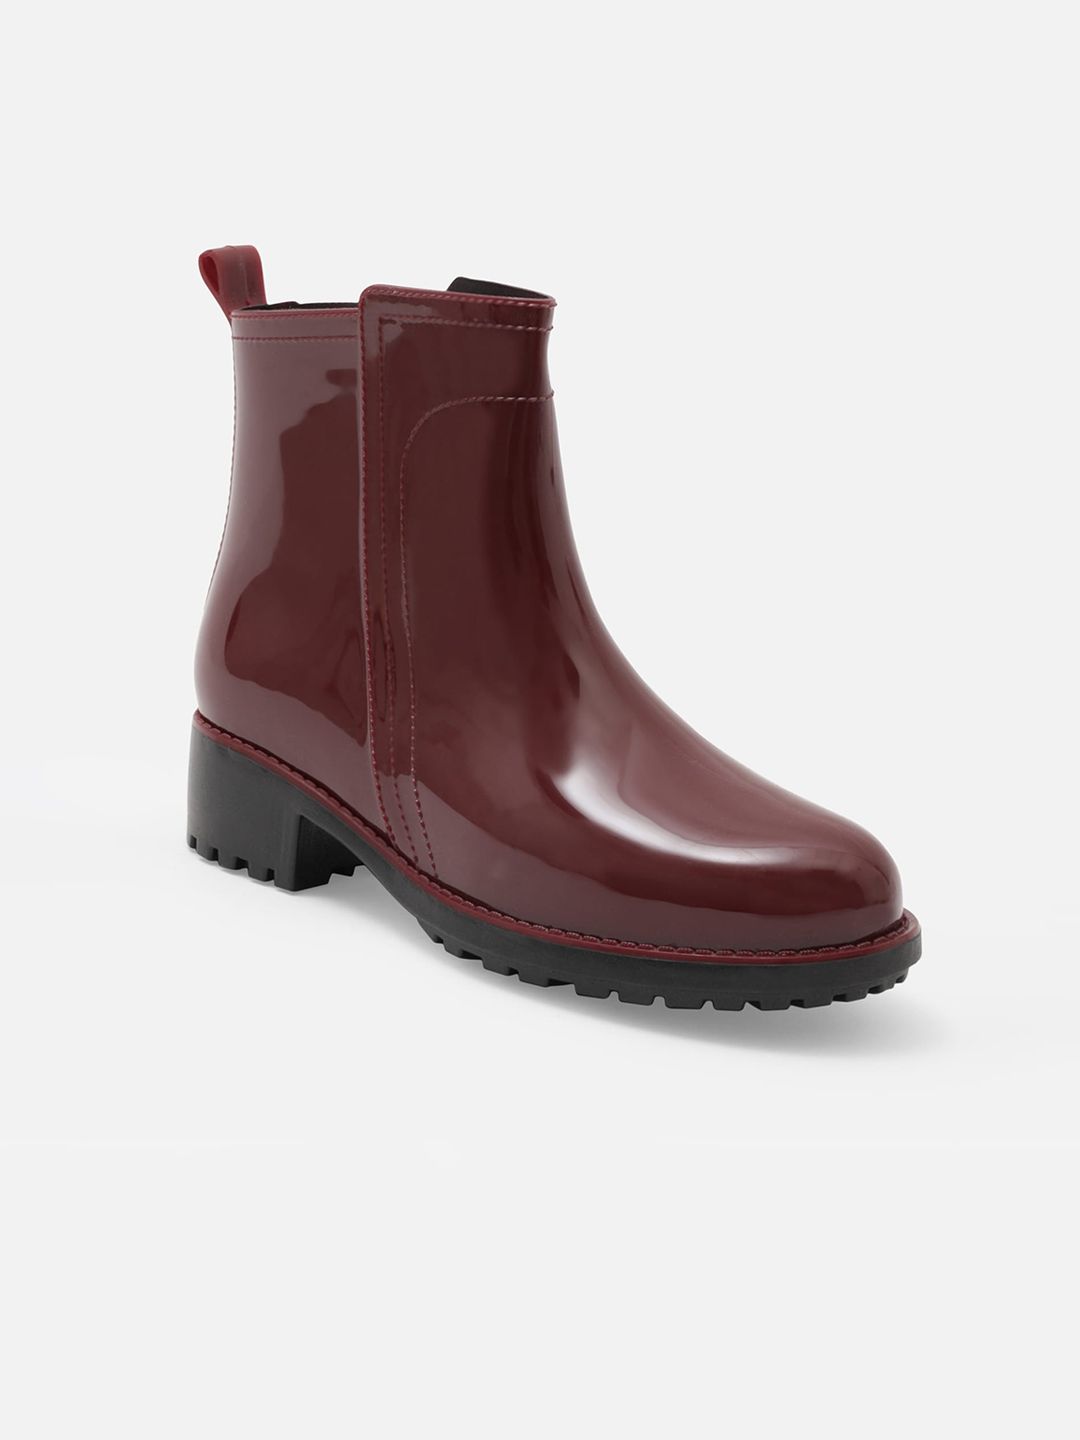 20Dresses Women Maroon Ankle Length Rain Boots Price in India